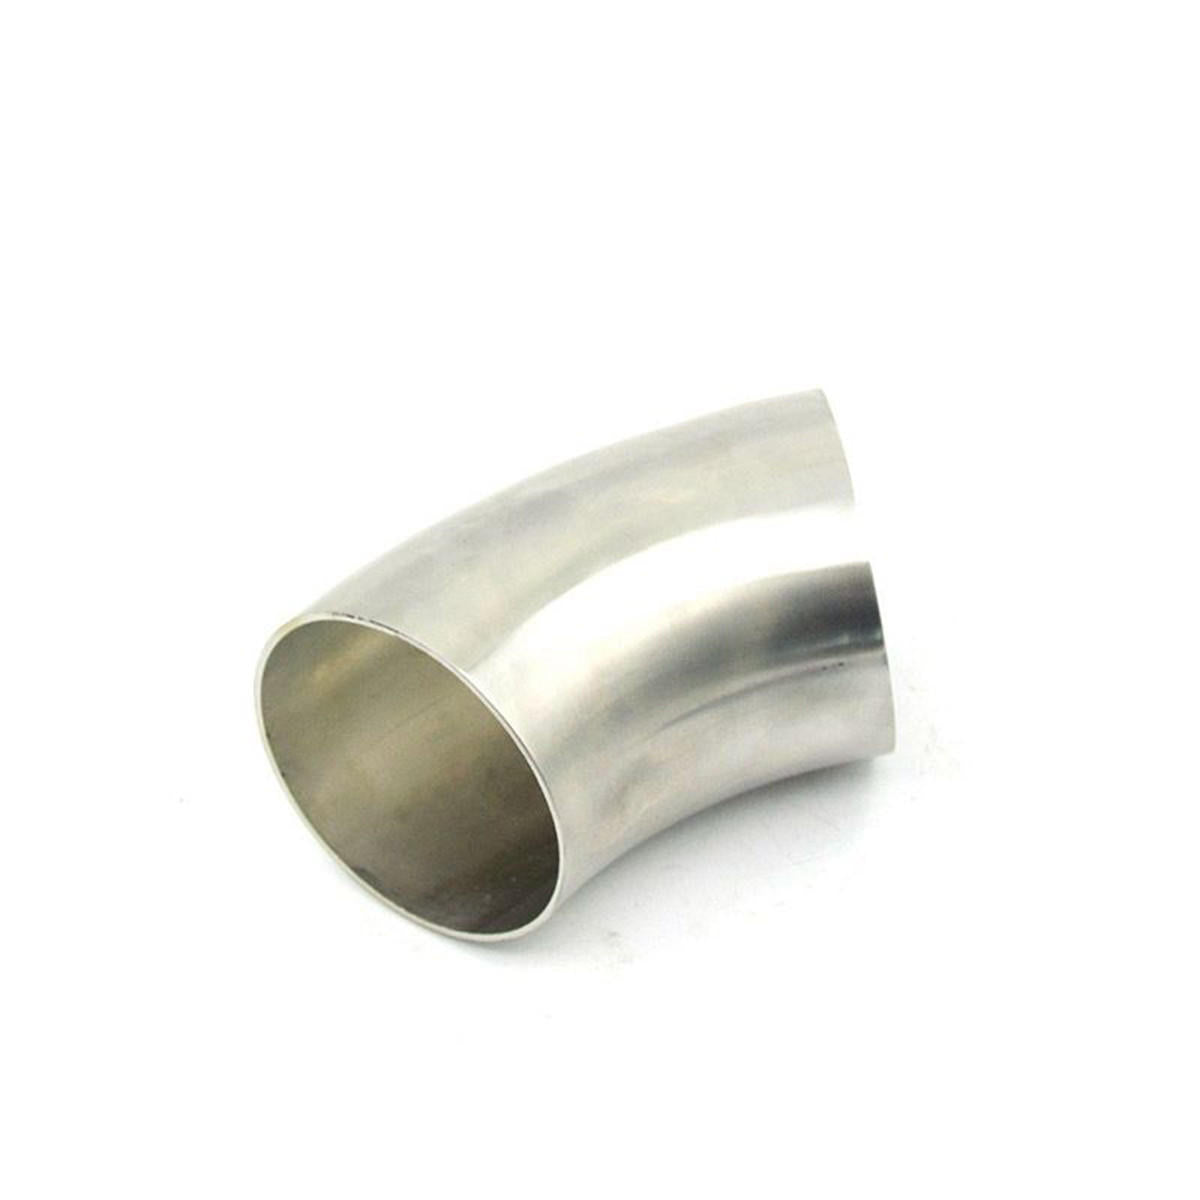 2.5 Inch 63mm Stainless Steel 45 Degree Exhaust Bend Elbow Pipe - Auto GoShop